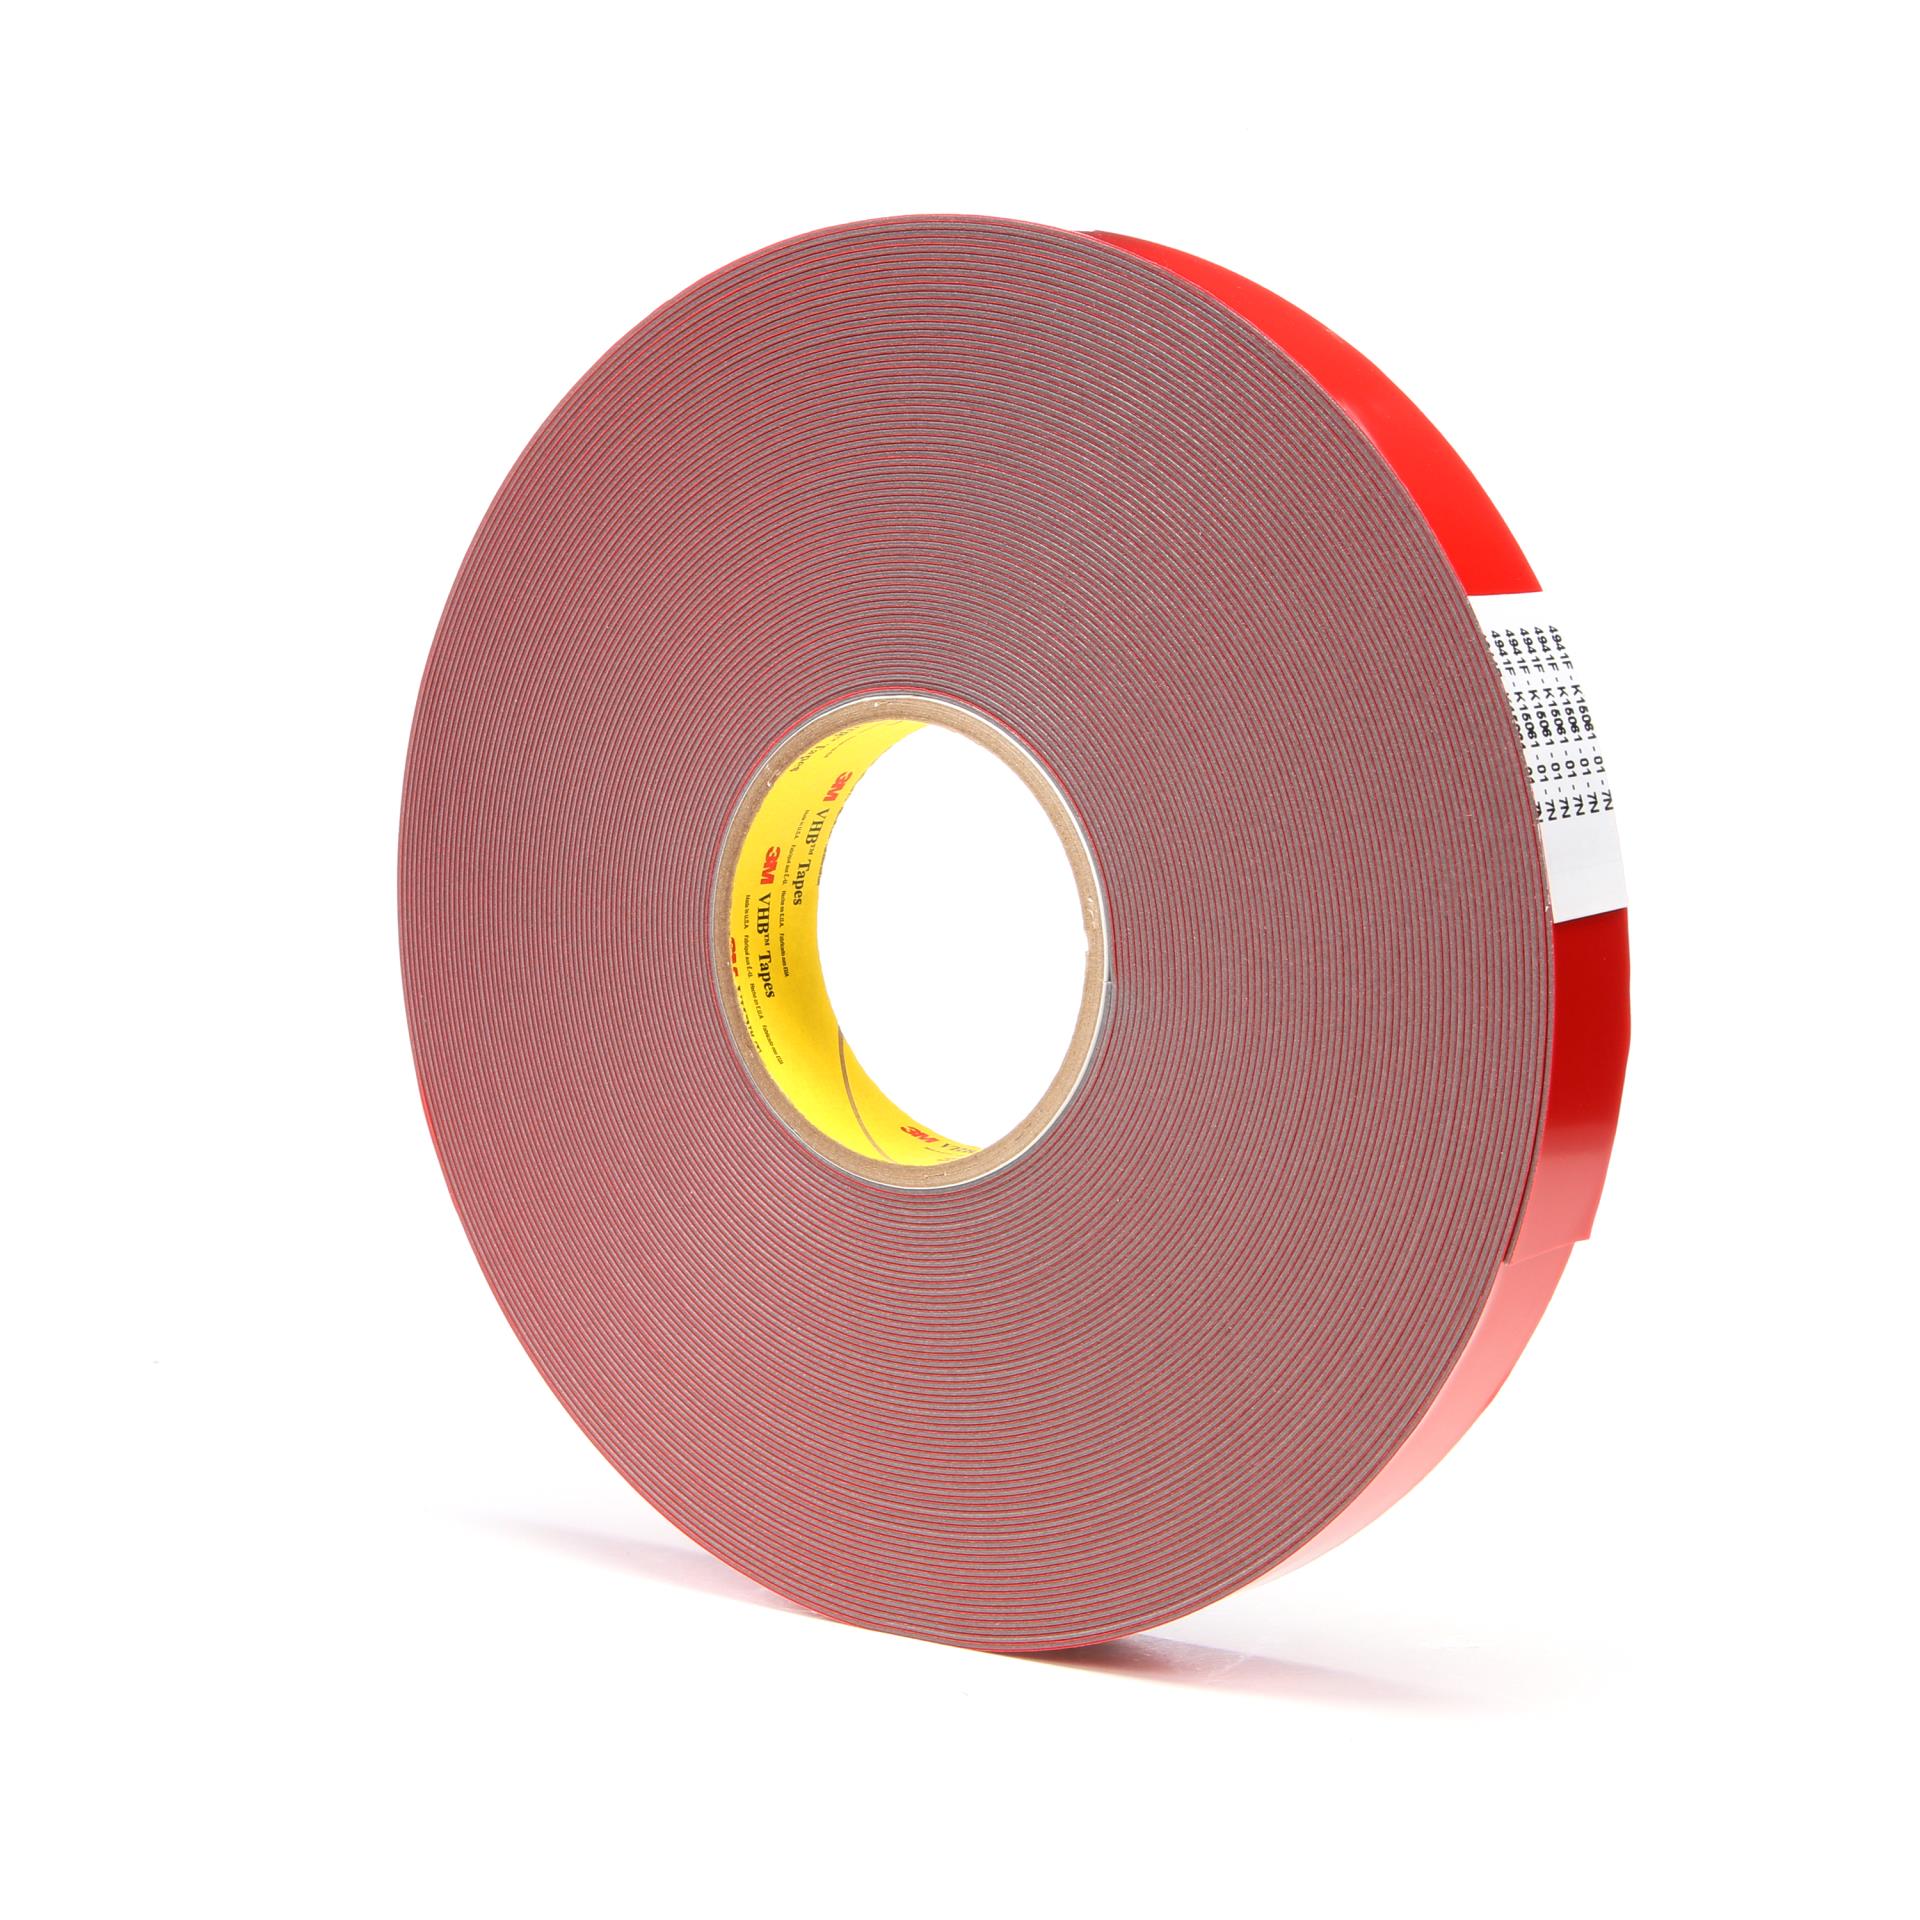 00021200322167 3M™ VHB™ Tape 4941F, Gray, in x 36 yd, 45 mil, Film  Liner, rolls per case Aircraft products na 9381704